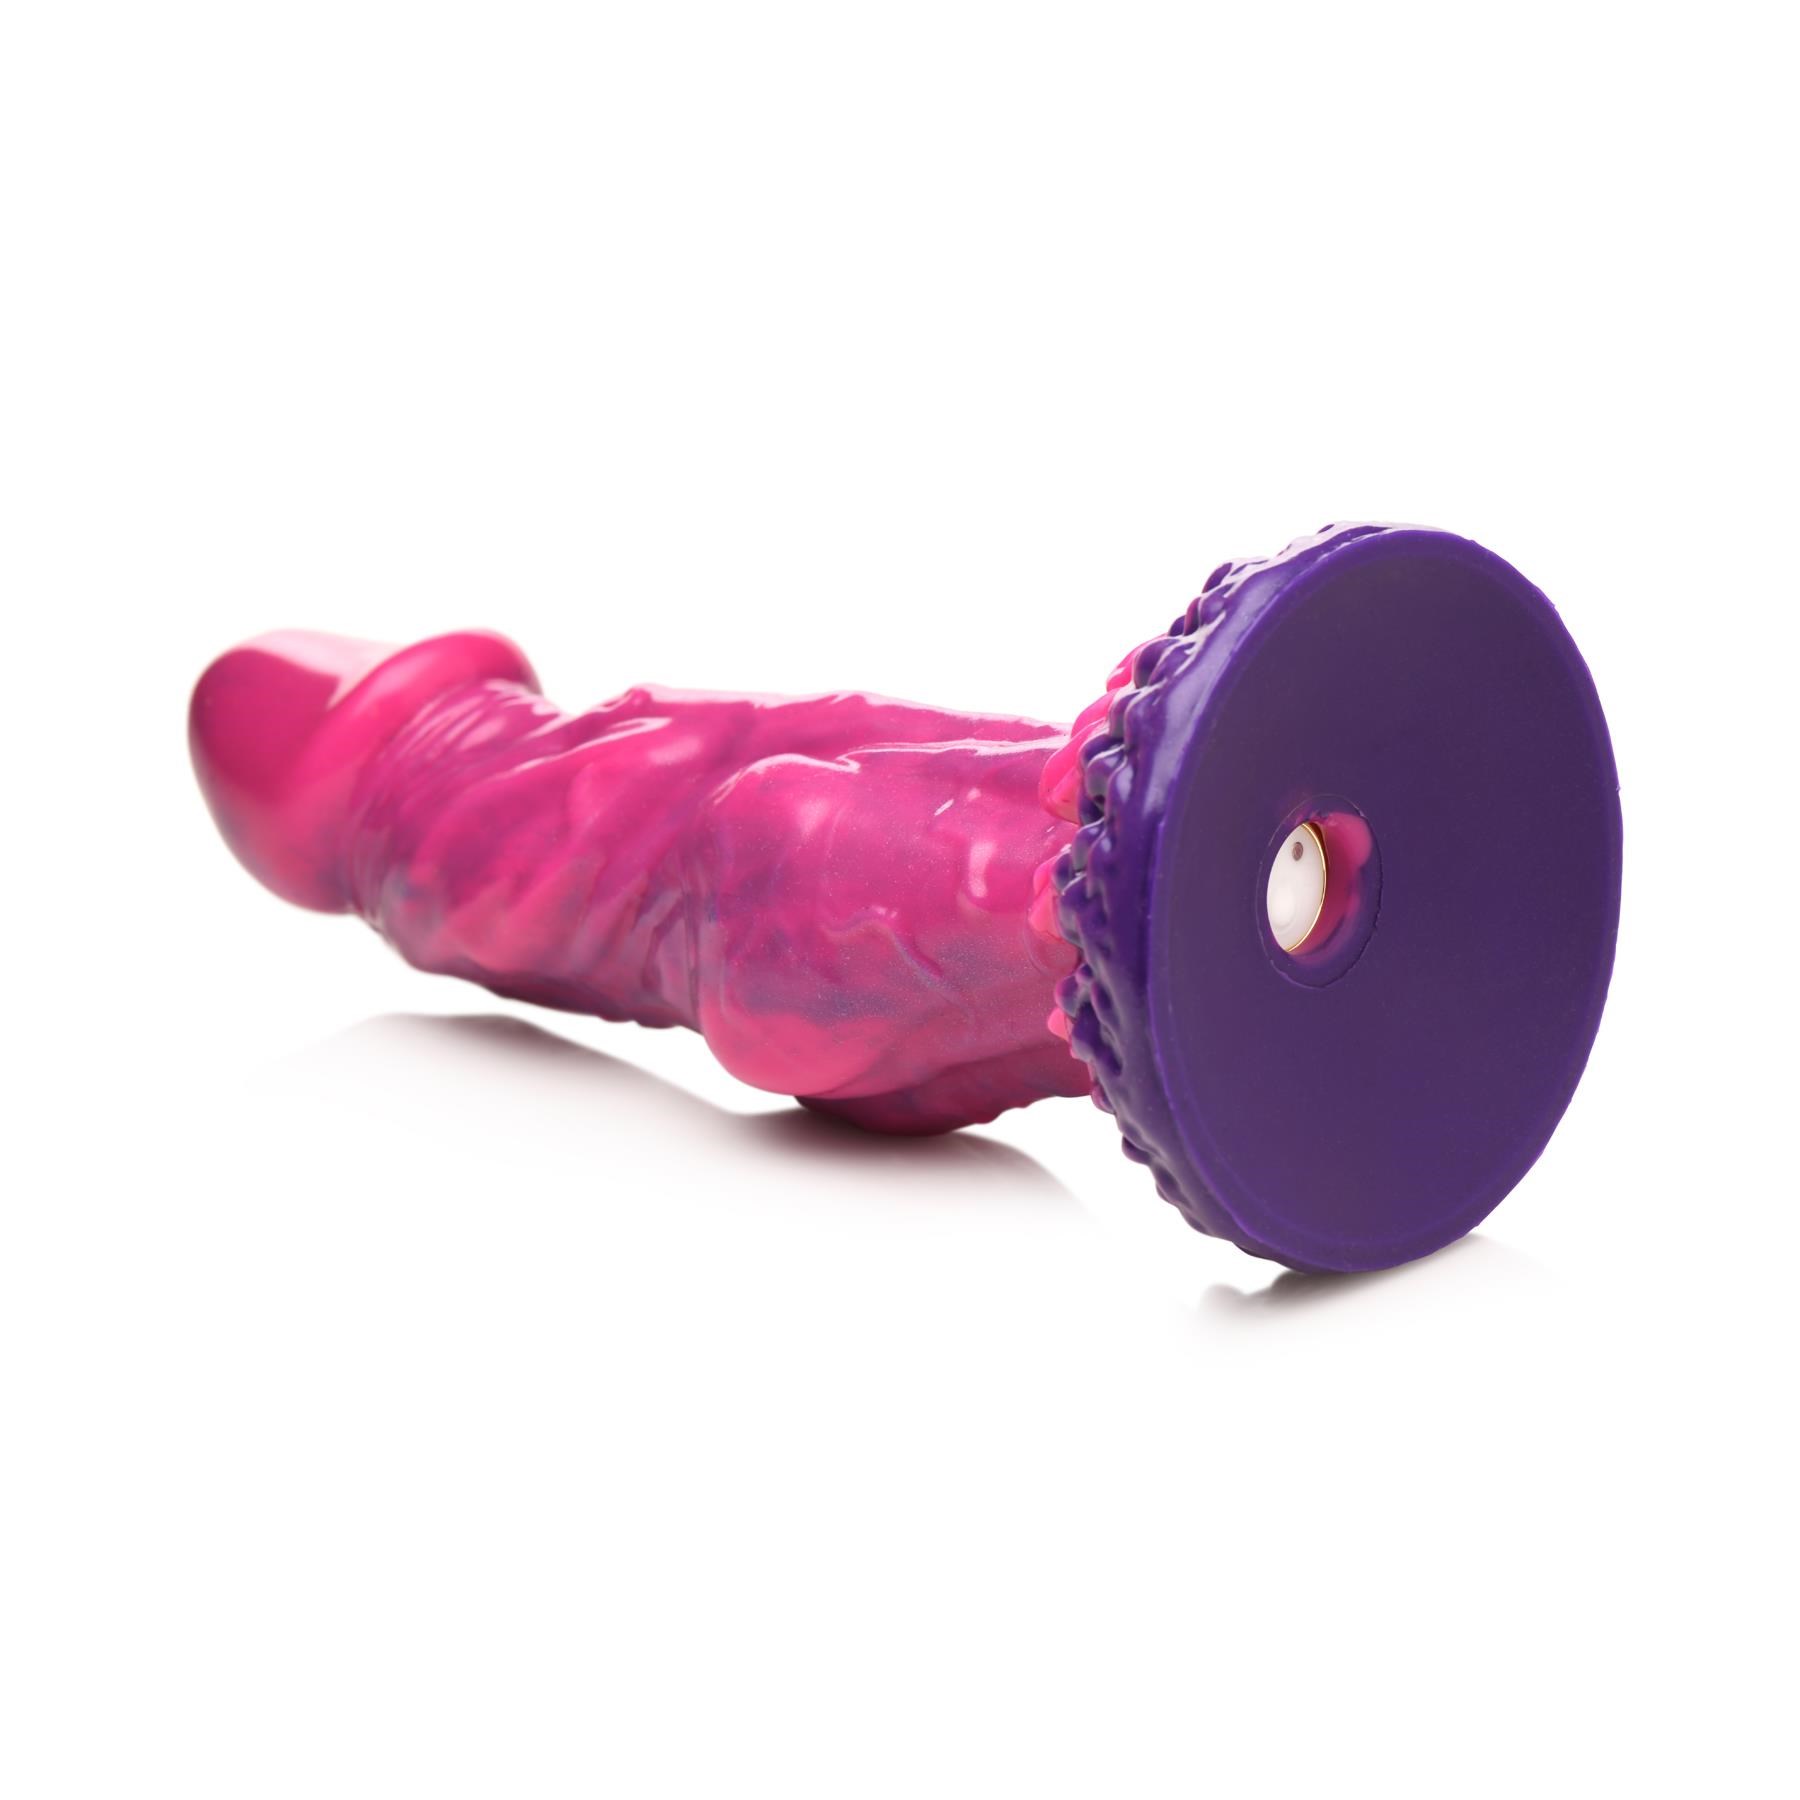 CreatureCocks Xenox Vibrating Dildo with Remote - Product Showing Suction Cup